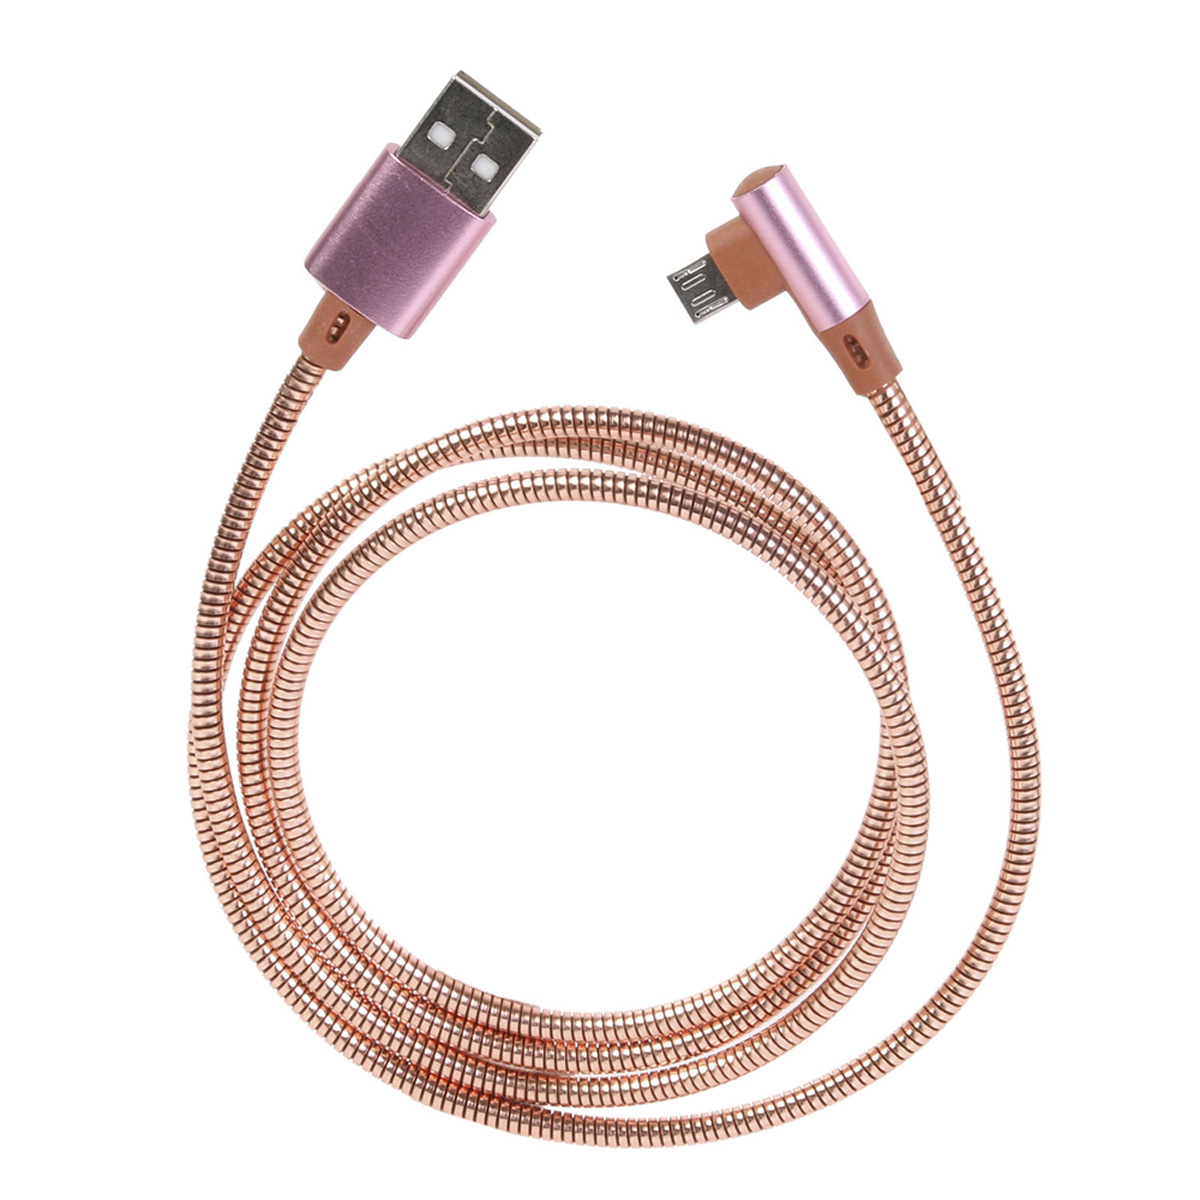 Cable de charge et syncro Android micro USB, rosé - 1 m - [R0320]